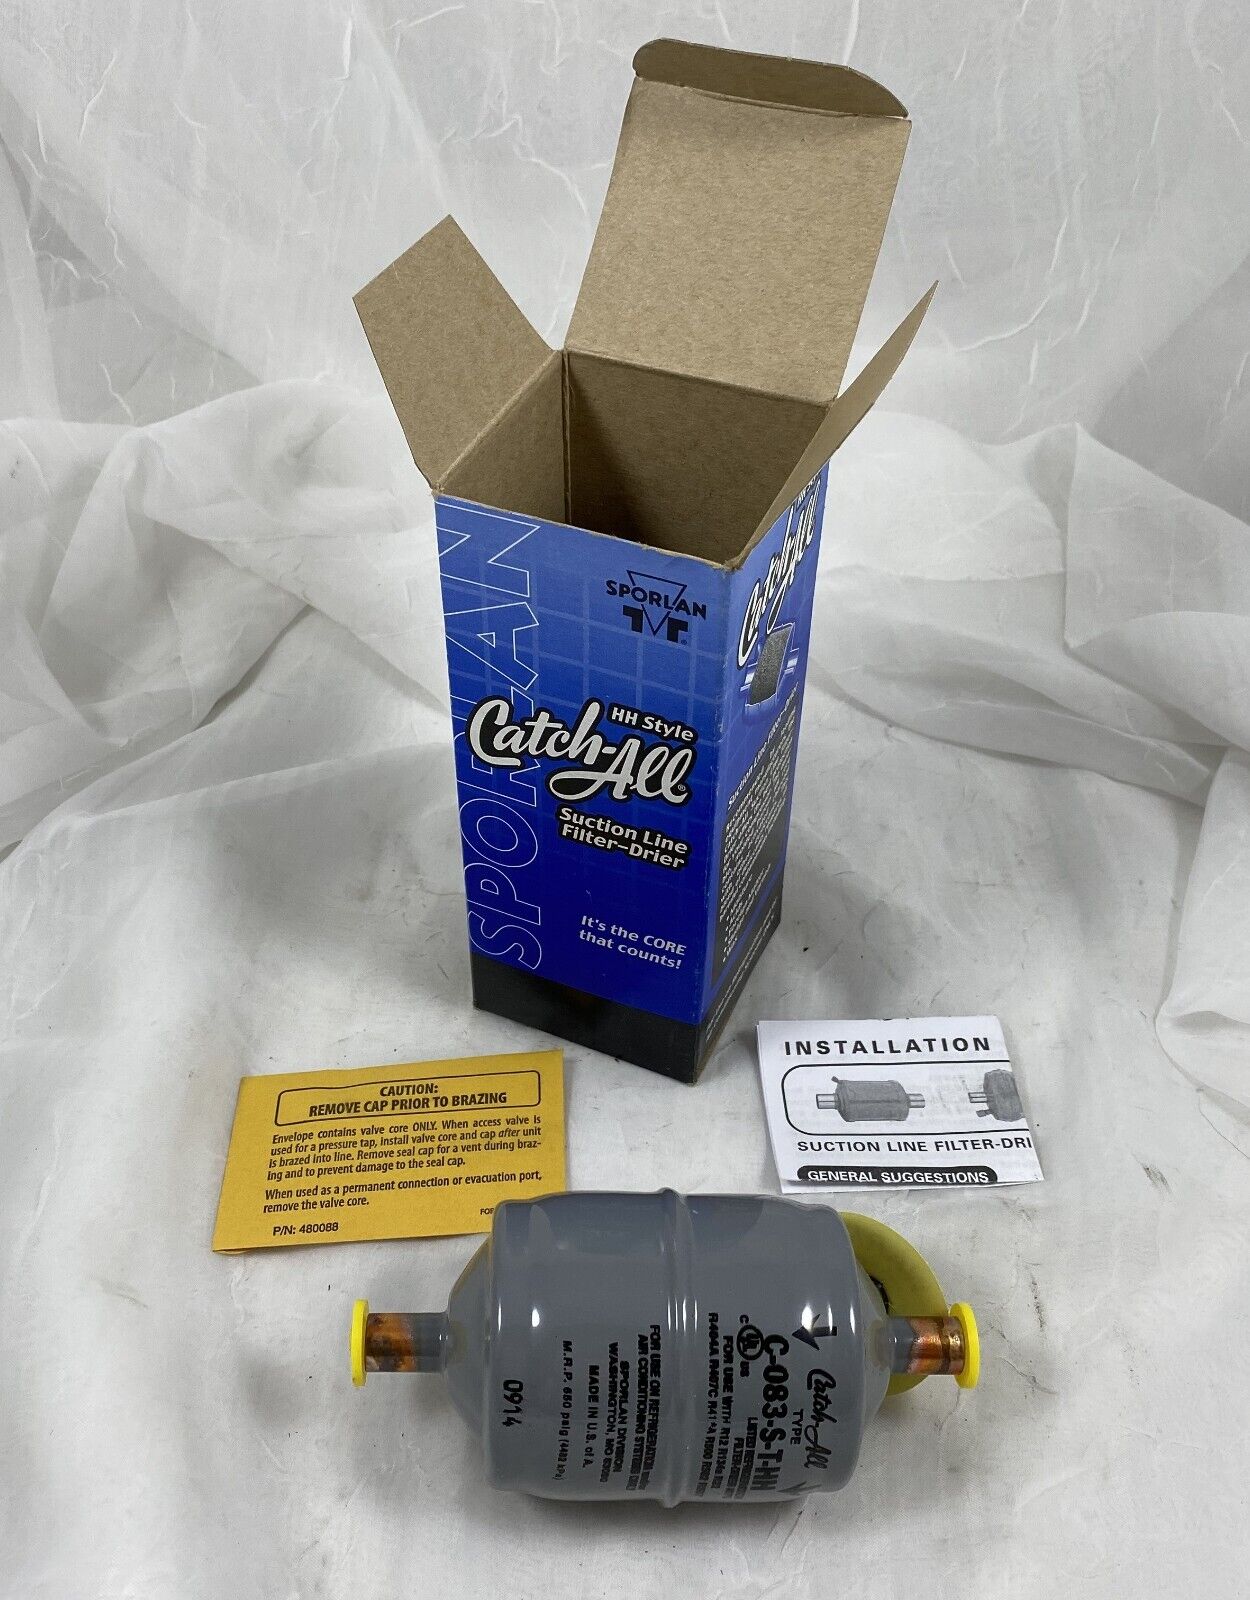 SPORLAN C-083-S-T-HH CATCH ALL SUCTION LINE FILTER-DRIER 3/8 ODF SOLDER, NEW